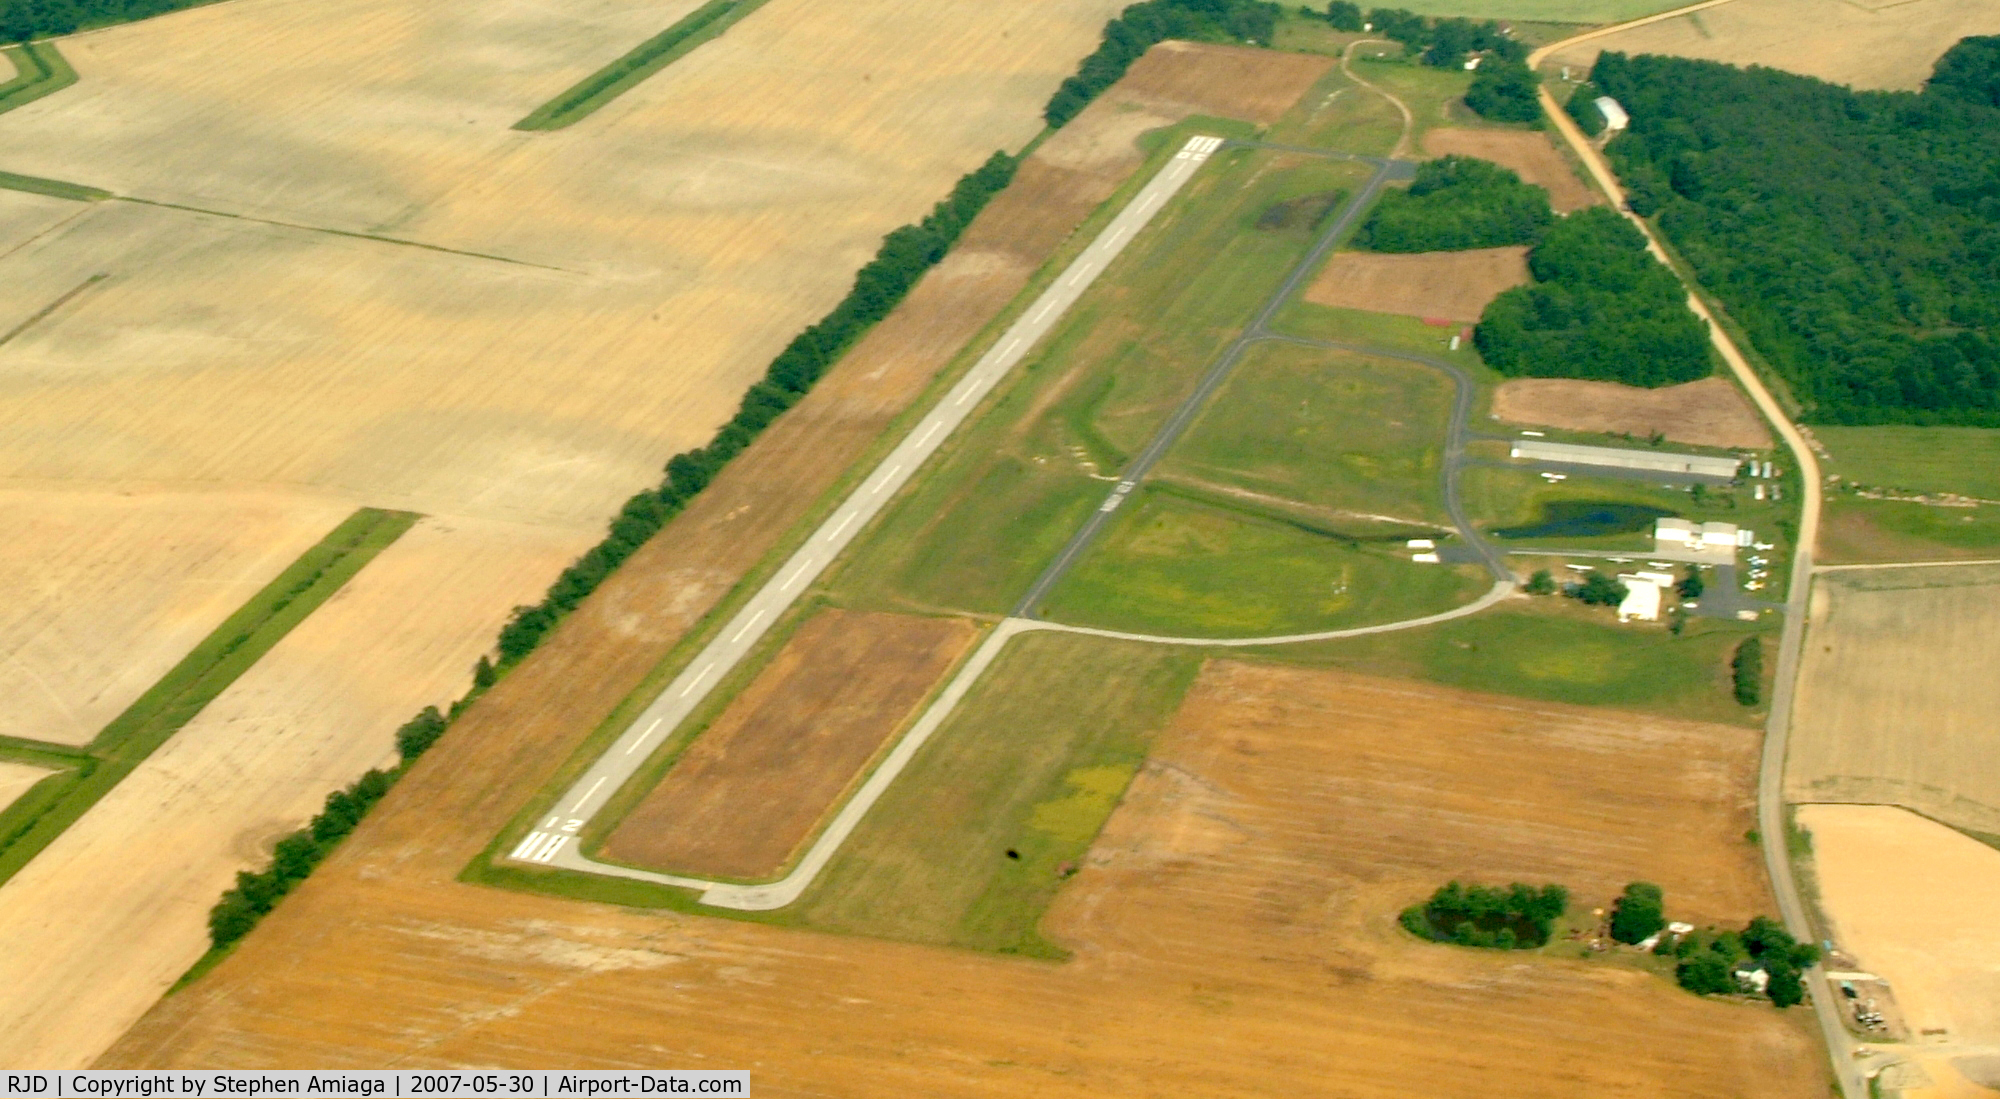 Ridgely Airpark Airport (RJD) - Passing by Ridgely on my way to Easton